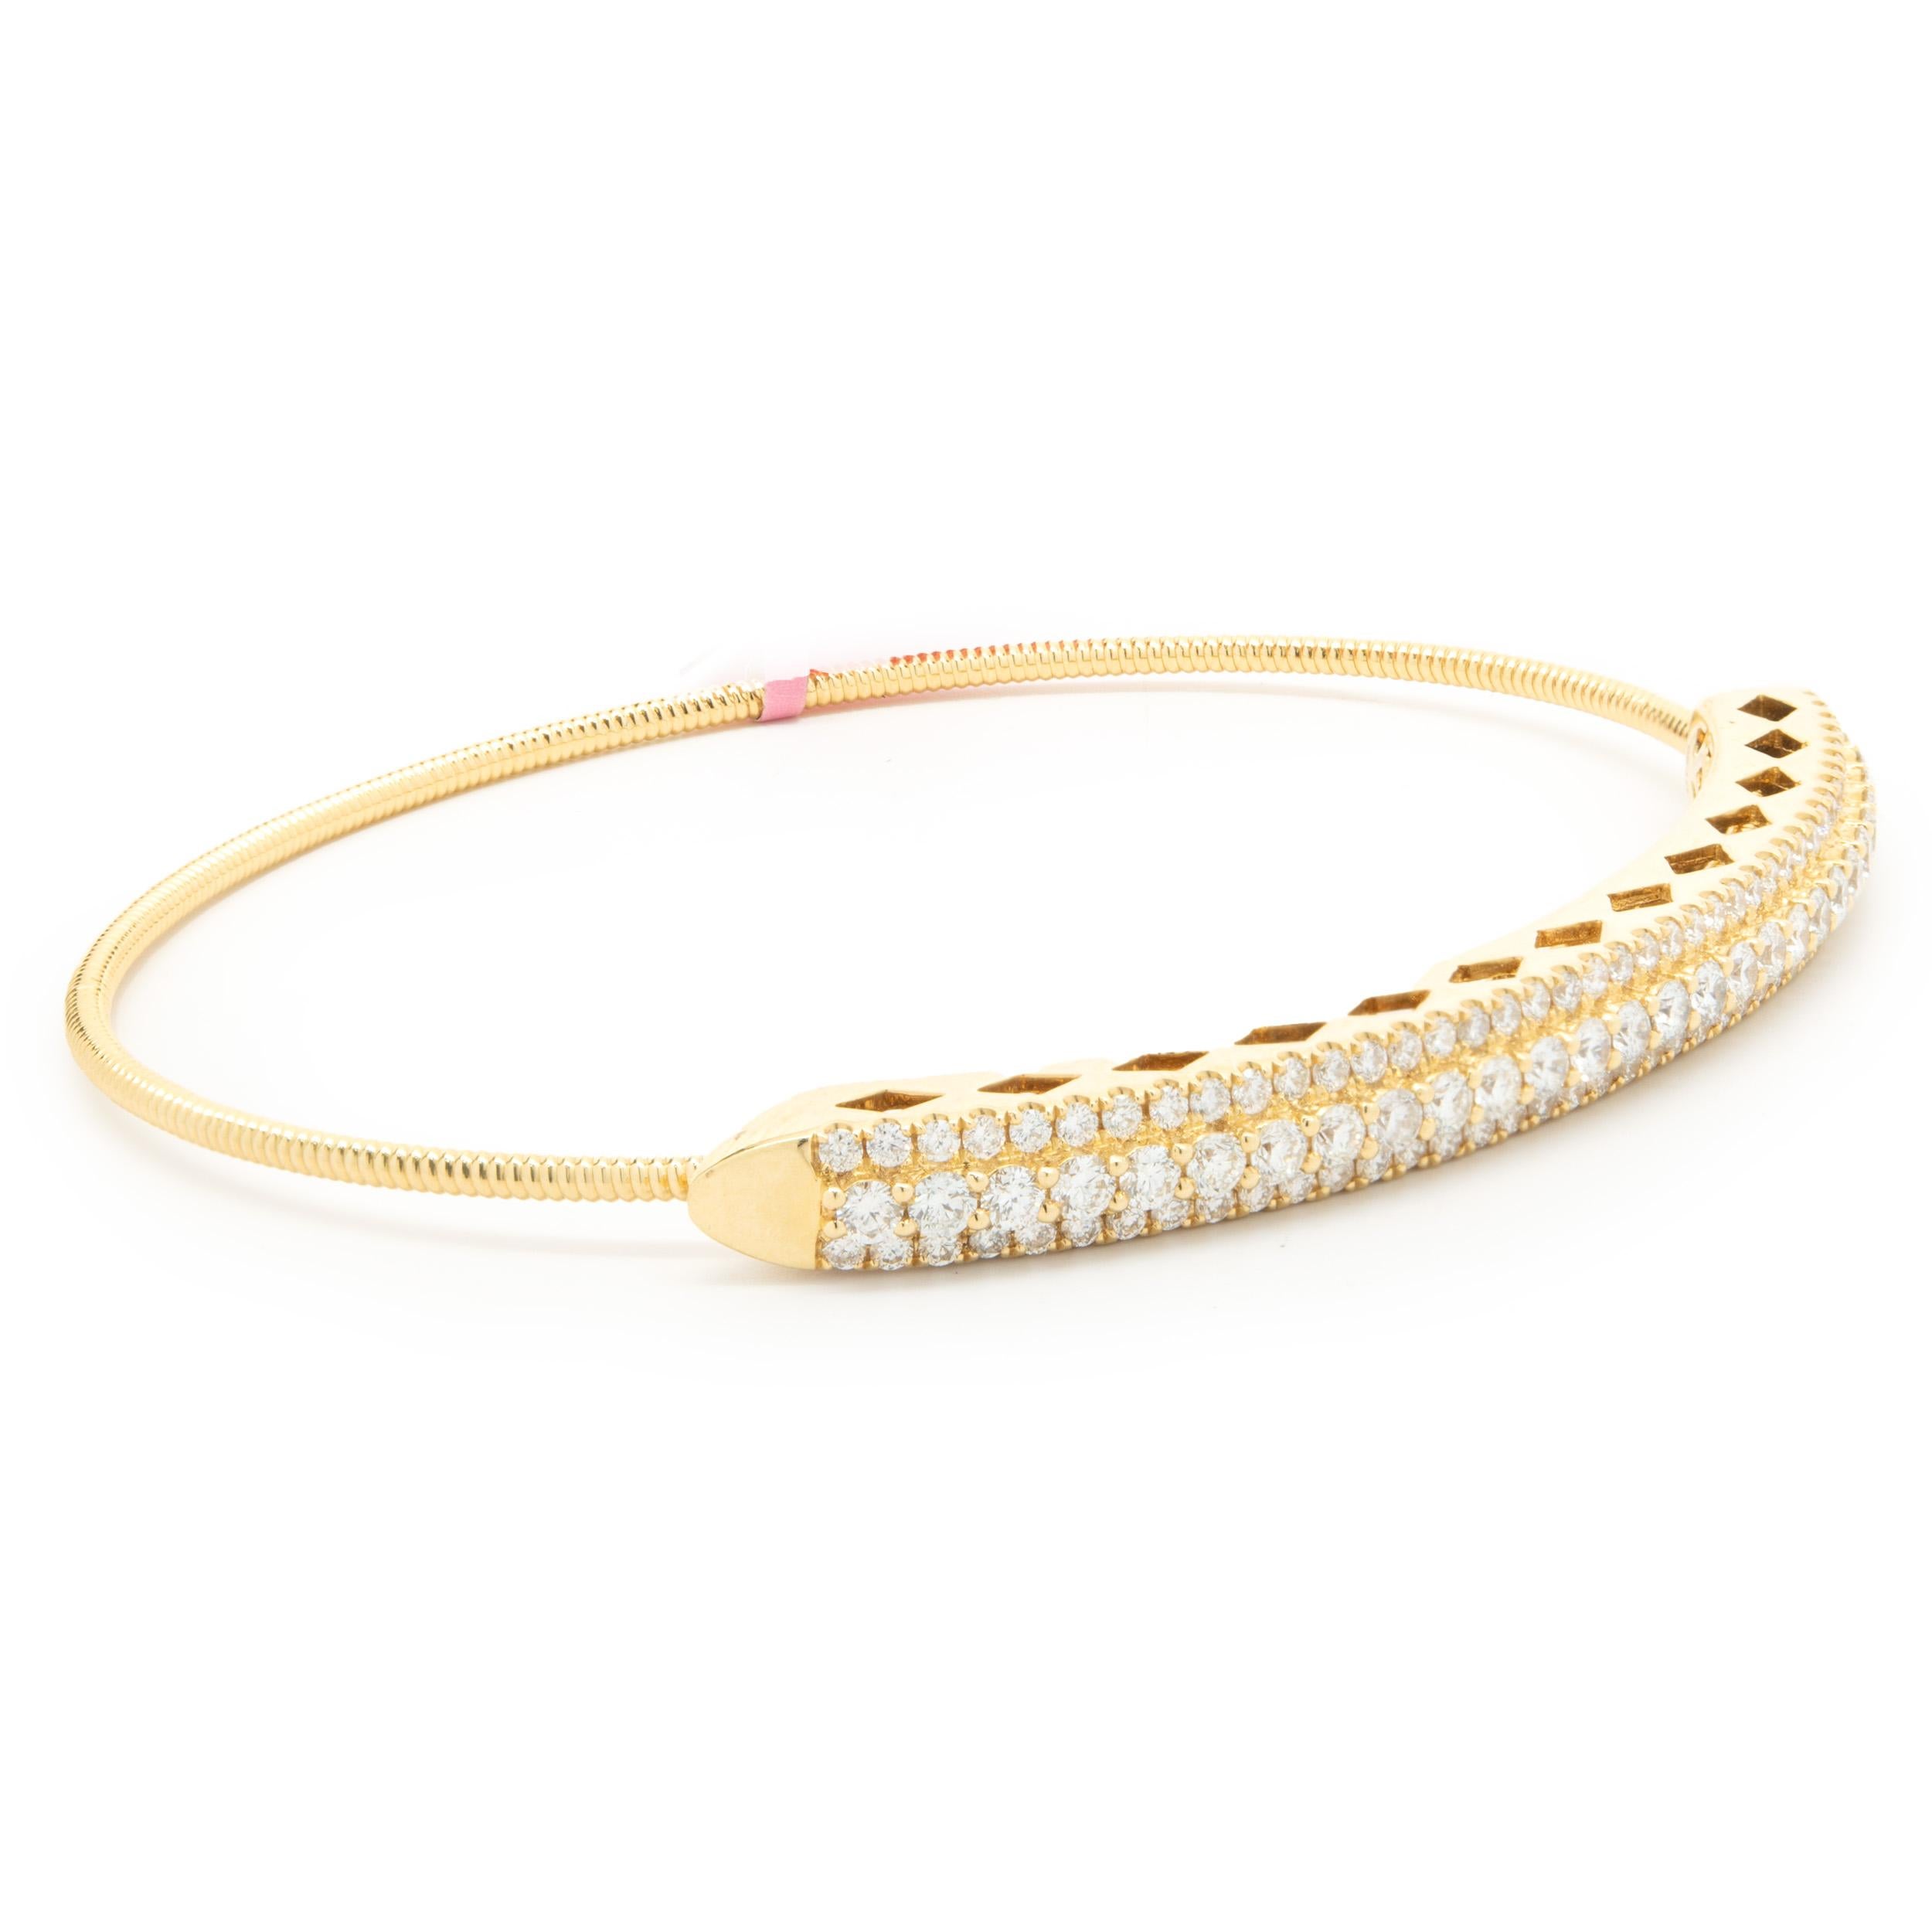 Designer: custom design
Material: 18K yellow gold
Diamonds: 110 round brilliant cut = 1.56cttw
Color: G
Clarity: SI1
Dimensions: bracelet will fit up to a 7 -inch wrist
Weight: 11.33 grams